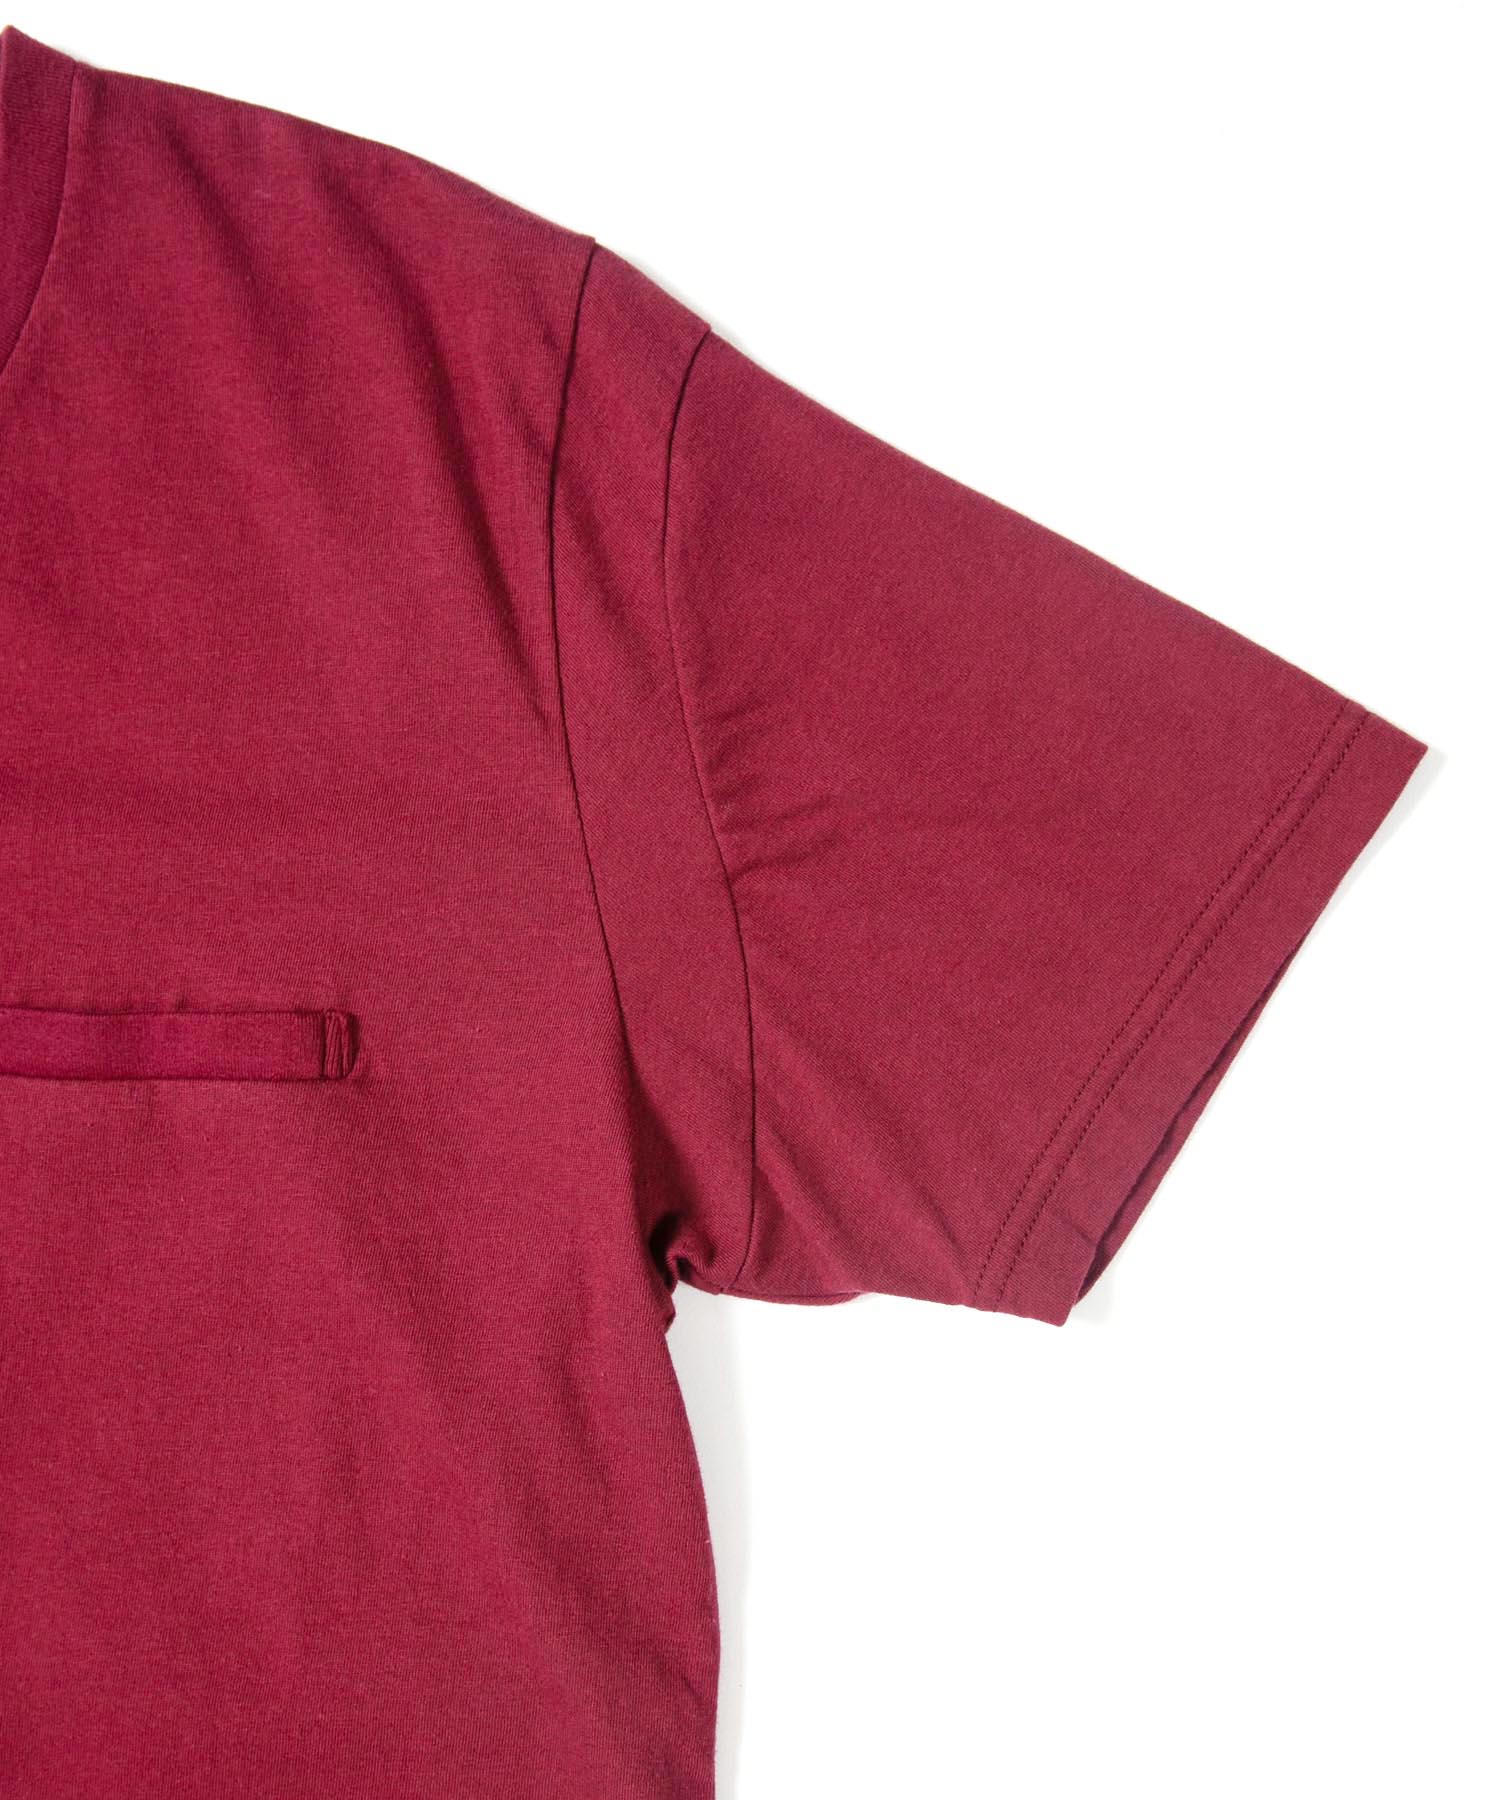 Load image into Gallery viewer, Natural Soft Cotton V neck T-shirt - WINE